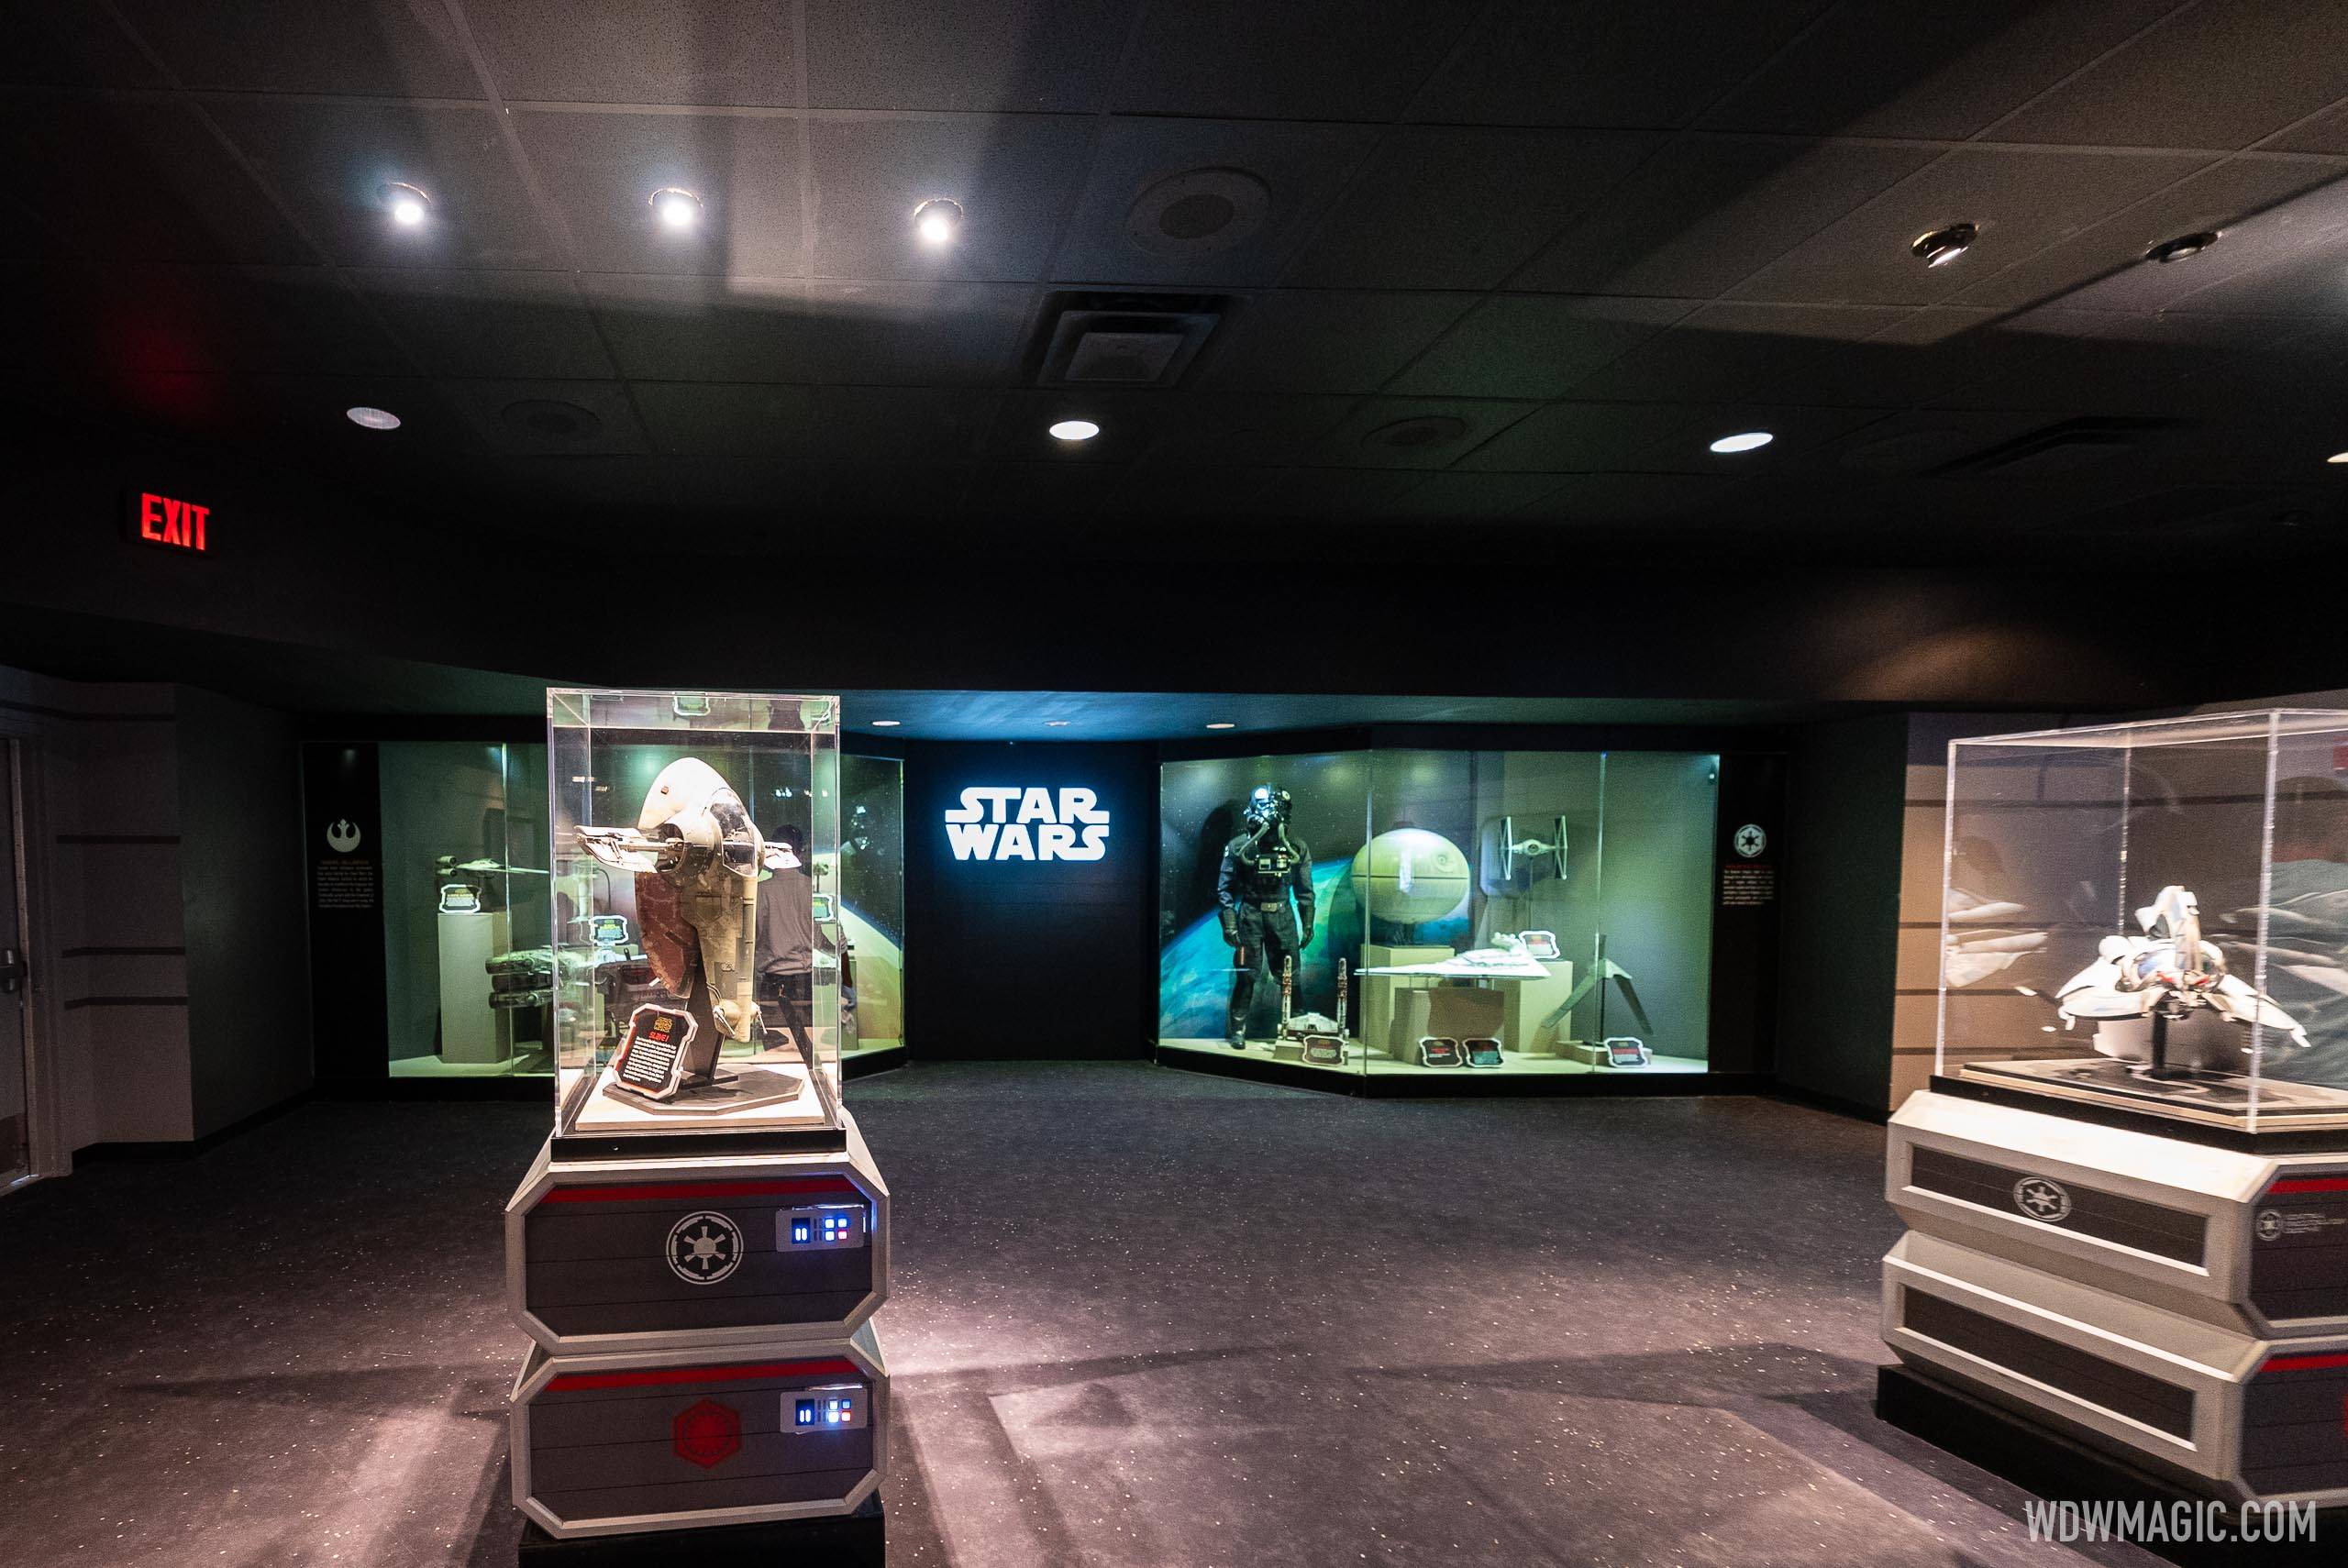 Launch Bay is currently a walk-through museum